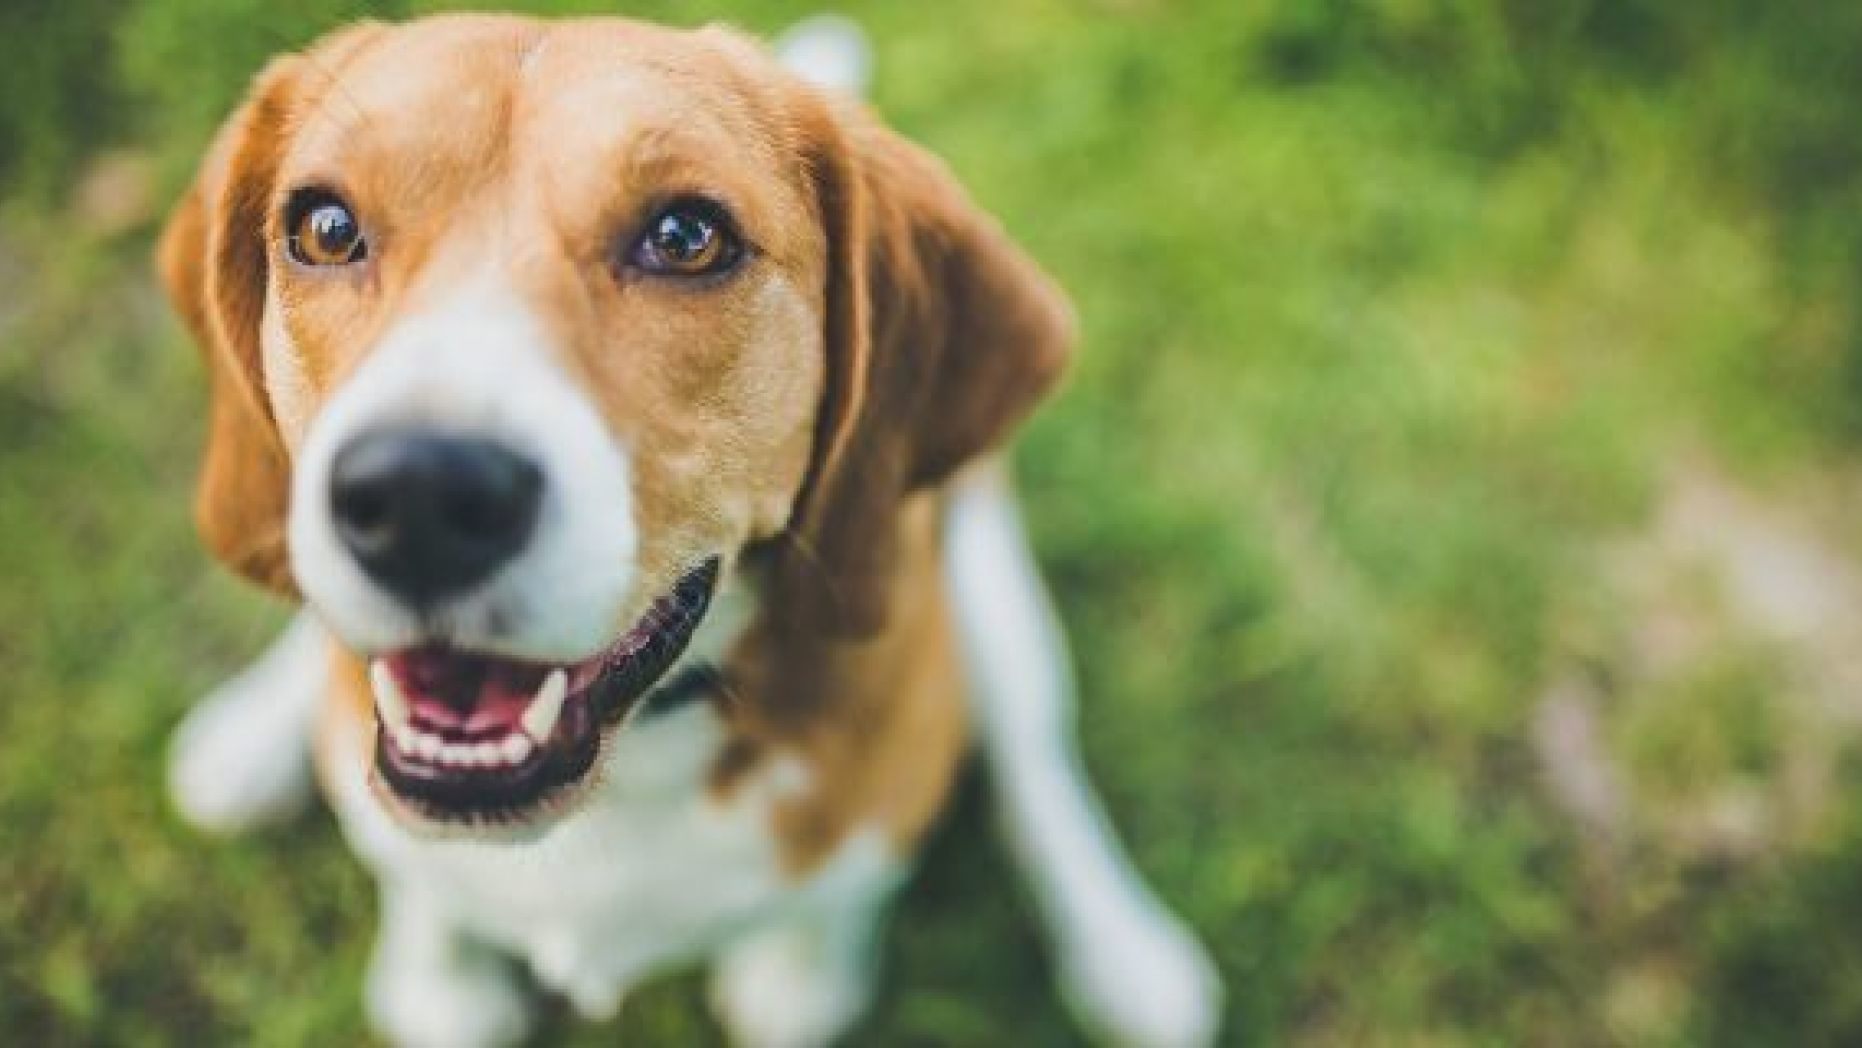 A new study presented on Monday has found that beagles can be trained to detect lung cancer from human blood samples with 97 percent accuracy. (Stock image)